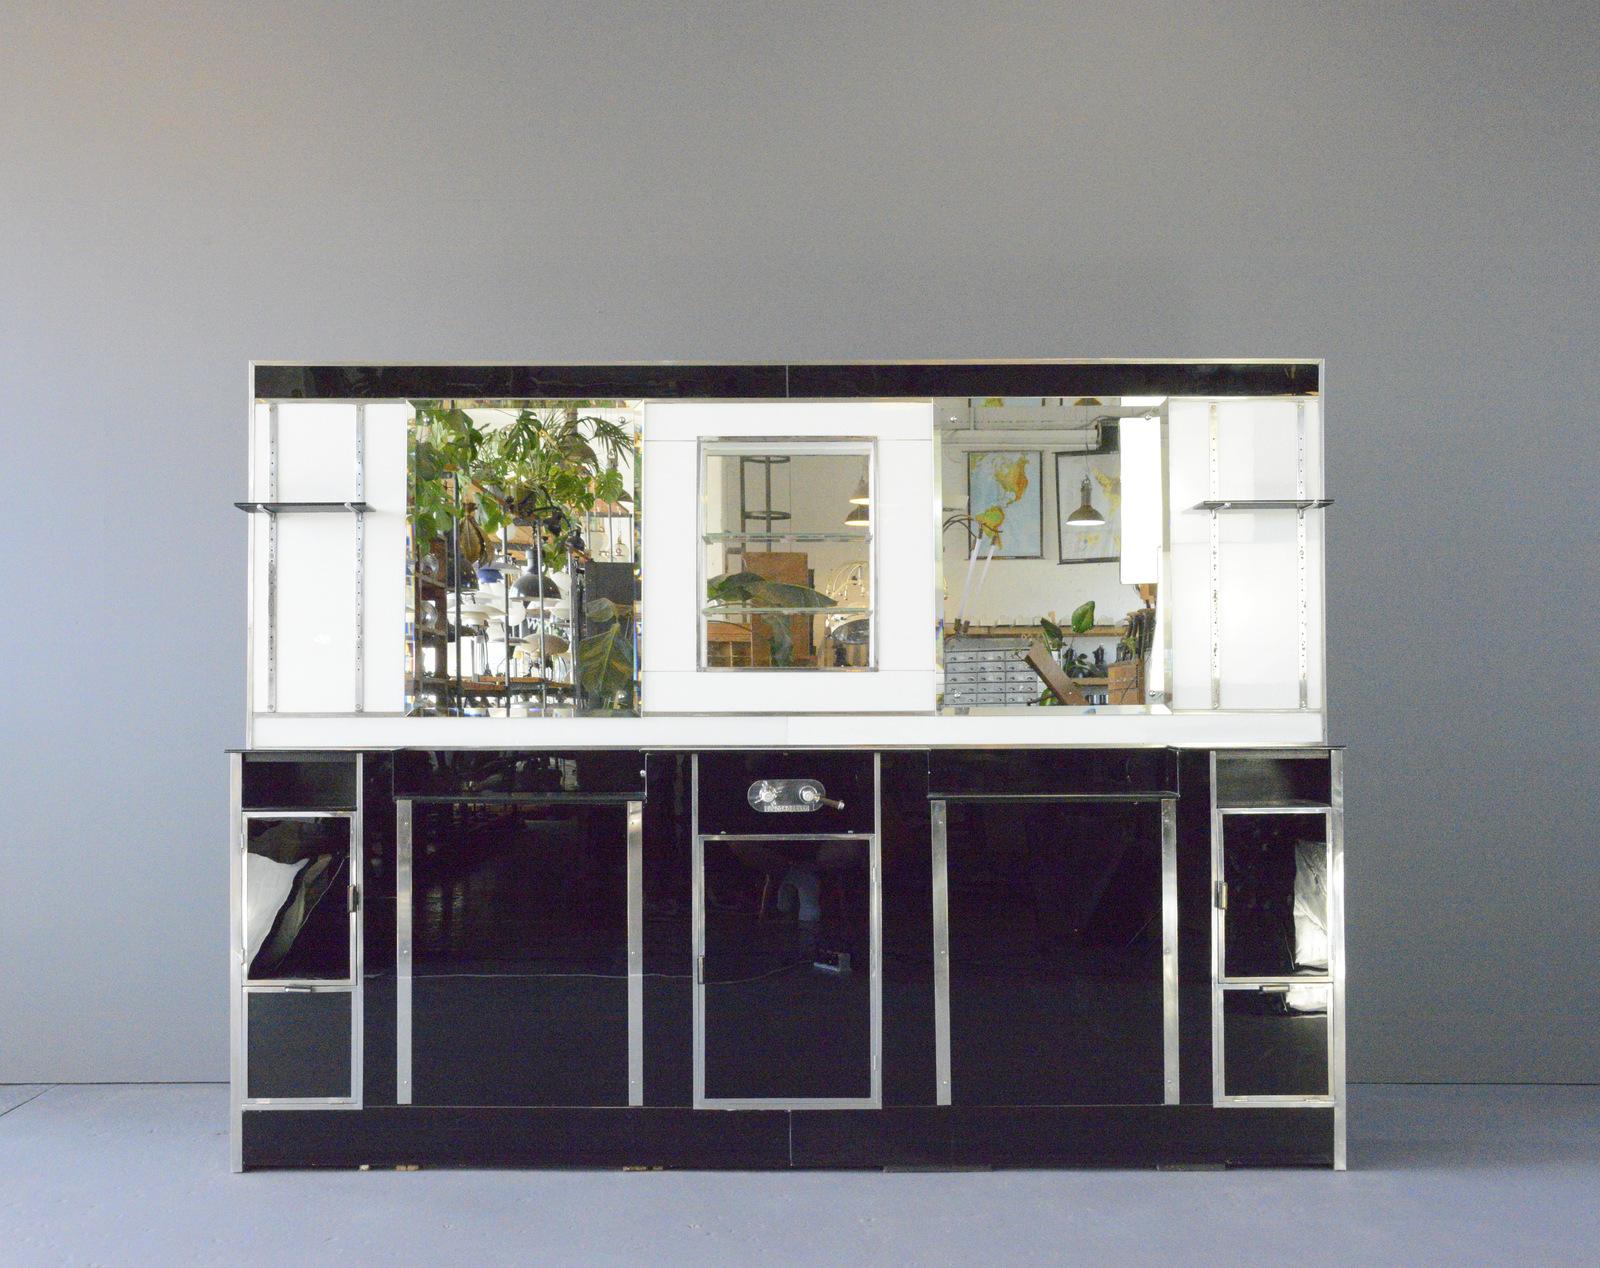 - Black and opal glass
- Nickel trims
- Shaving socket and light switch
- Multiple storage compartments and shelves
- Beveled mirrors
- Working taps which a flexi pipe can be brought over the top of the unit
- In two parts
- English ~